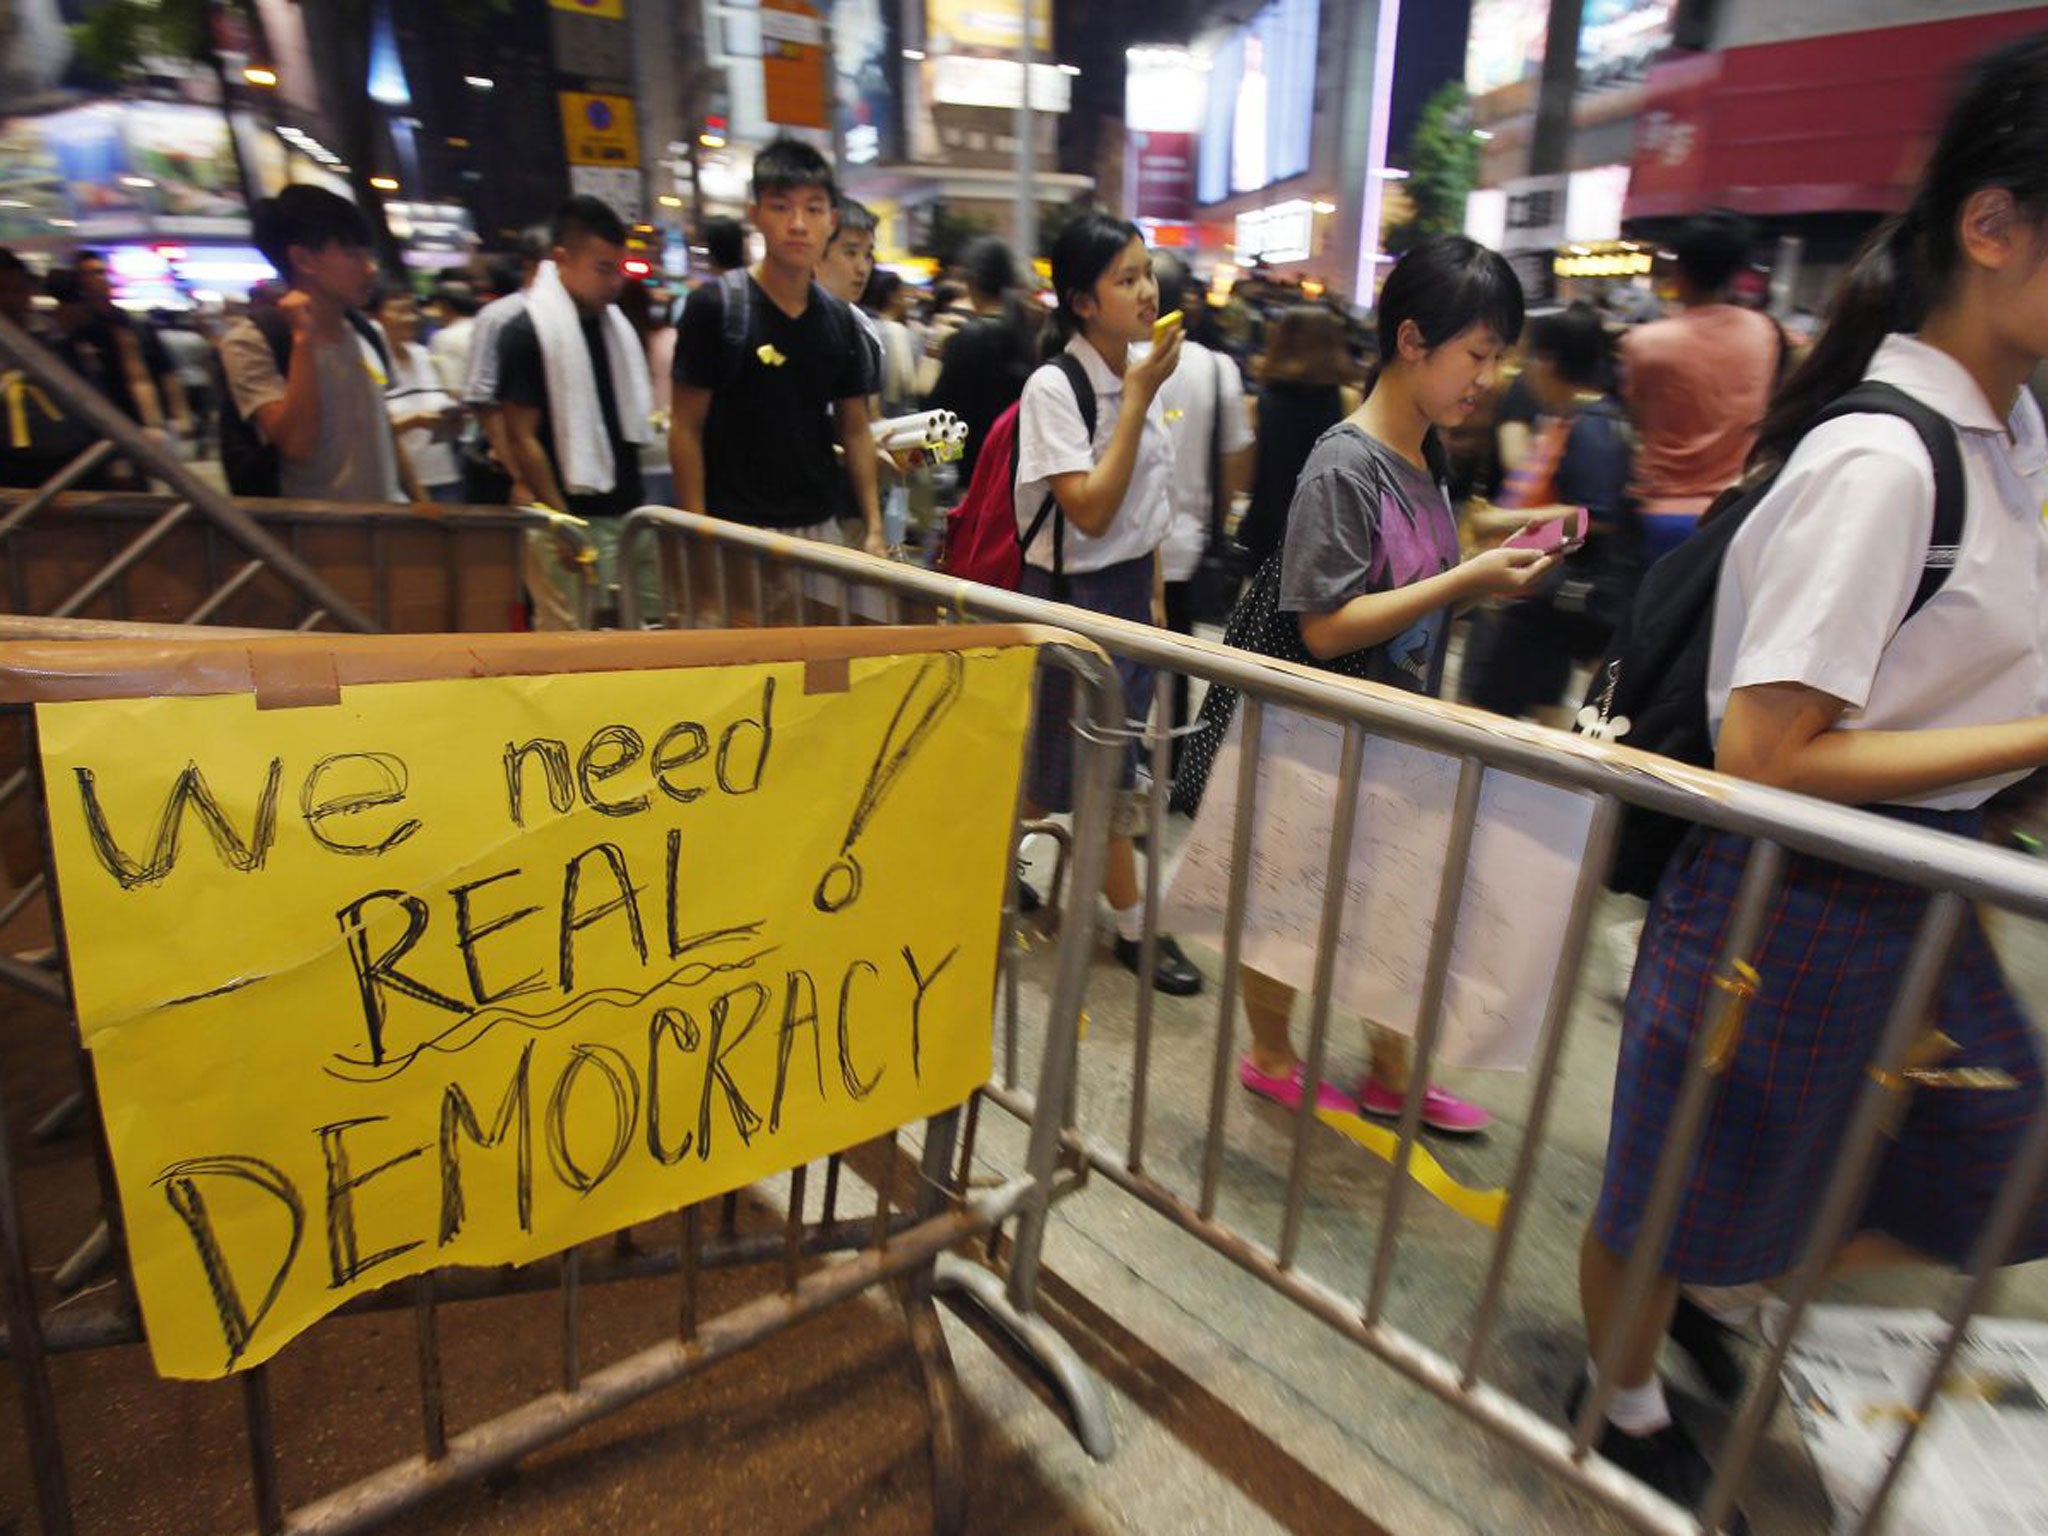 Students gather to attend a sit-in to block main roads of a popular fashion district in Hong Kong